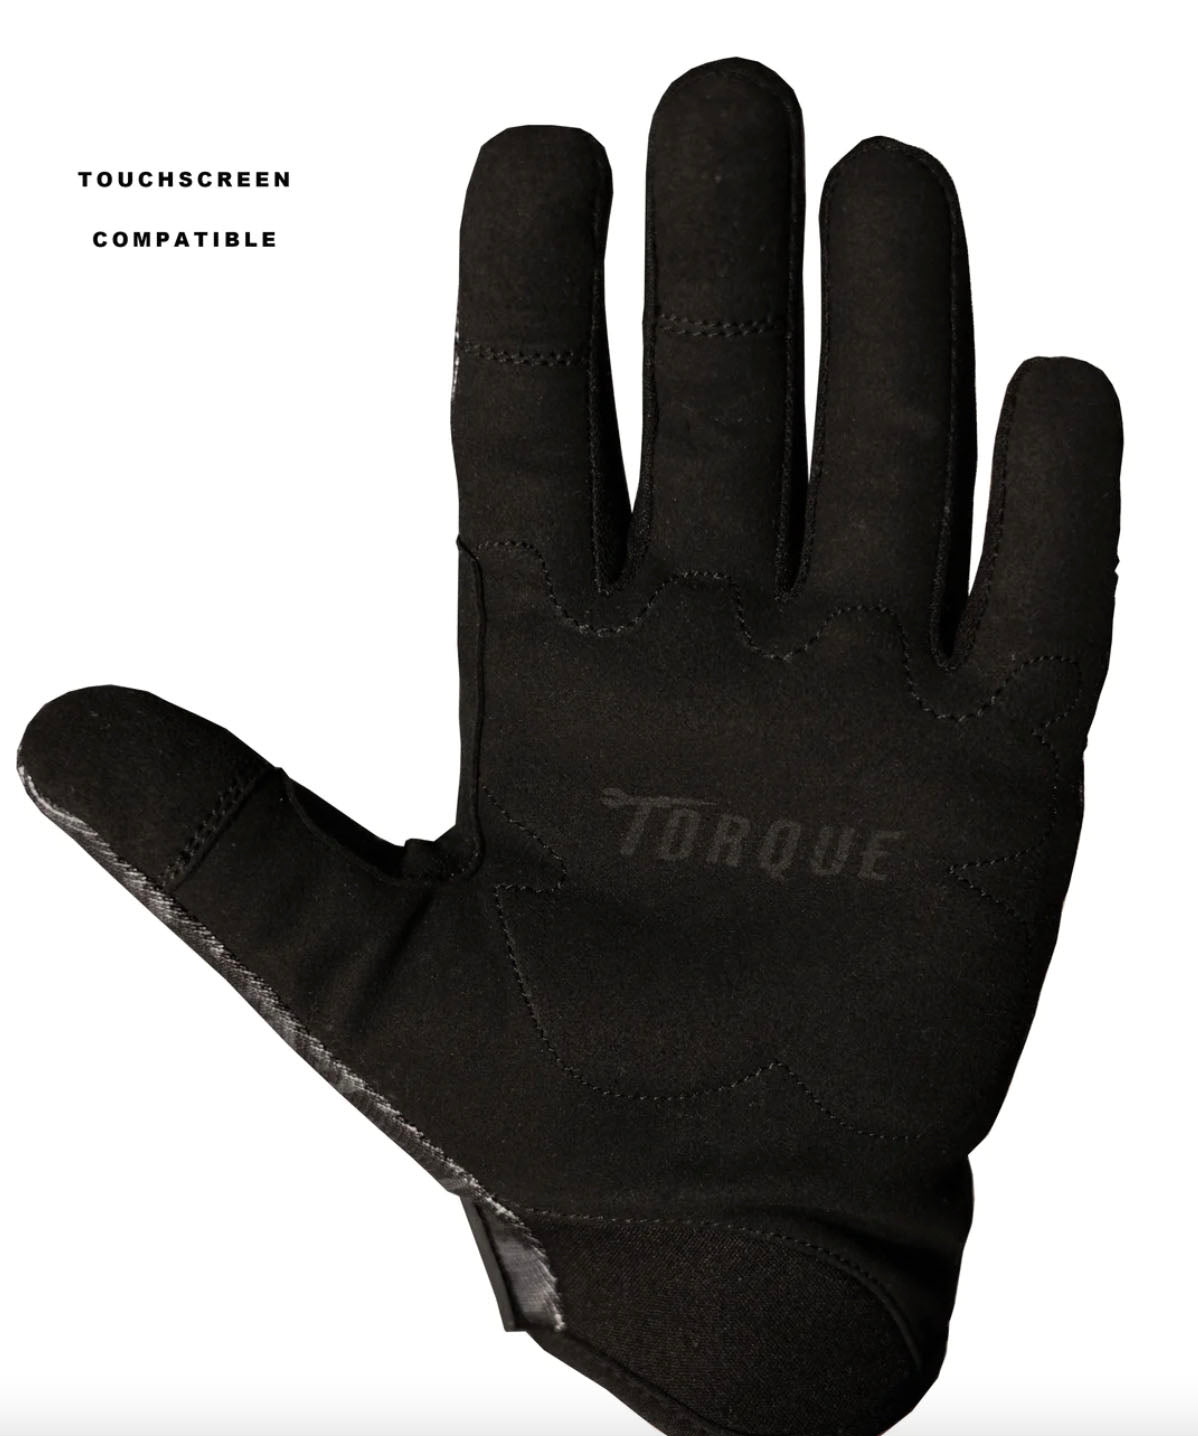 palm view of moto gloves with torque logo